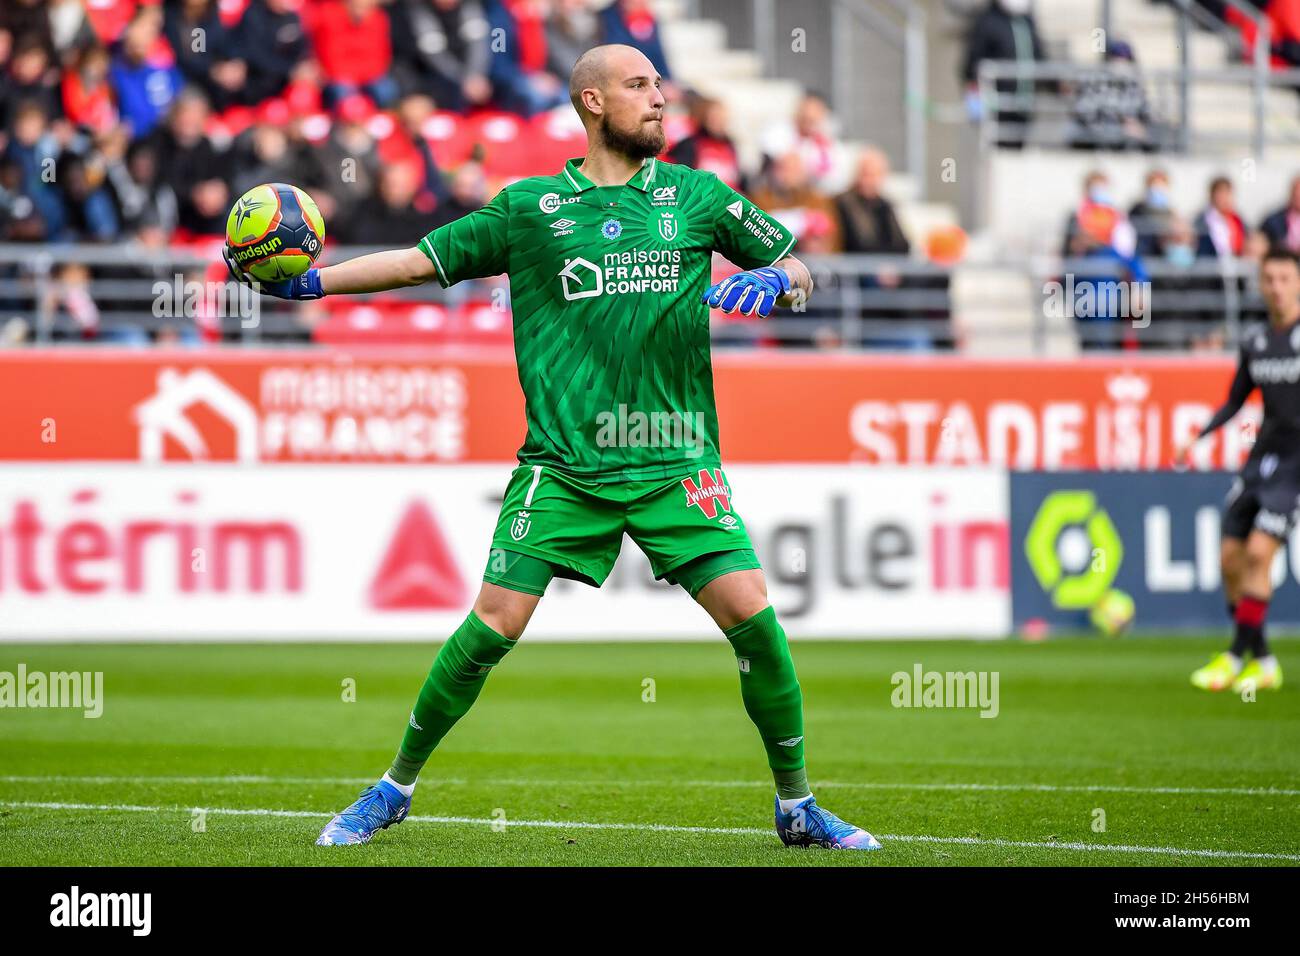 Reims, France. 07th Nov, 2021. REIMS, FRANCE - NOVEMBER 7: Goalkeeper Predrag Rajkovic of Stade Reims during the Ligue 1 match between Reims and Monaco at Stada Auguste-Delaune II on November 7, 2021 in Reims, France (Photo by Matthieu Mirville/Orange Pictures) Credit: Orange Pics BV/Alamy Live News Stock Photo